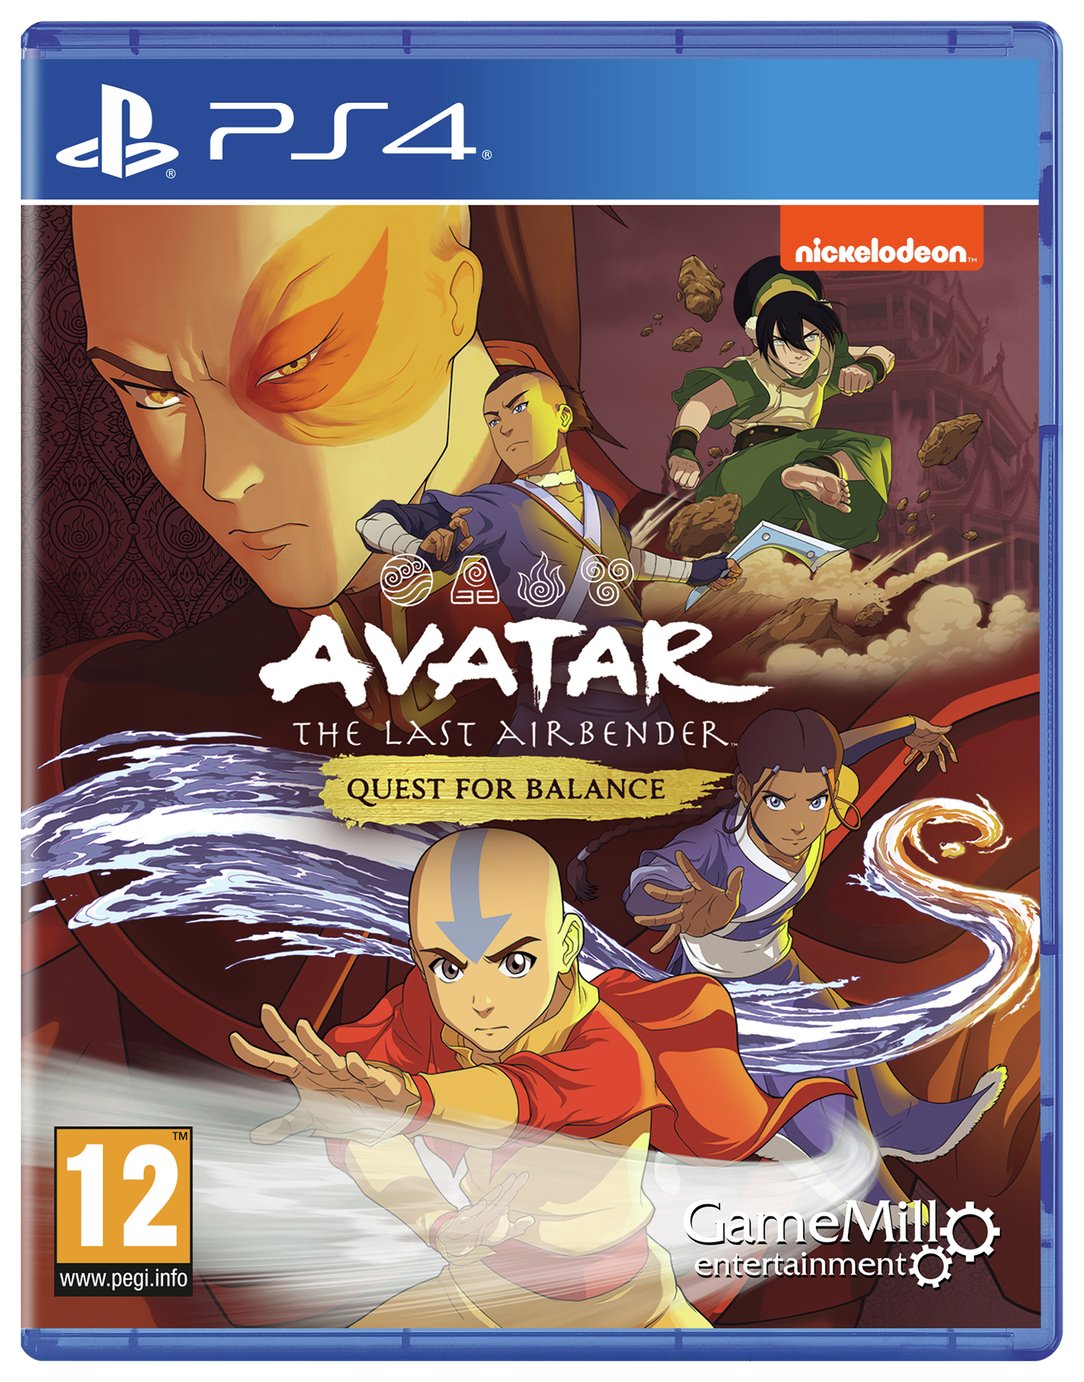 Avatar: The Last Airbender PS4 Game